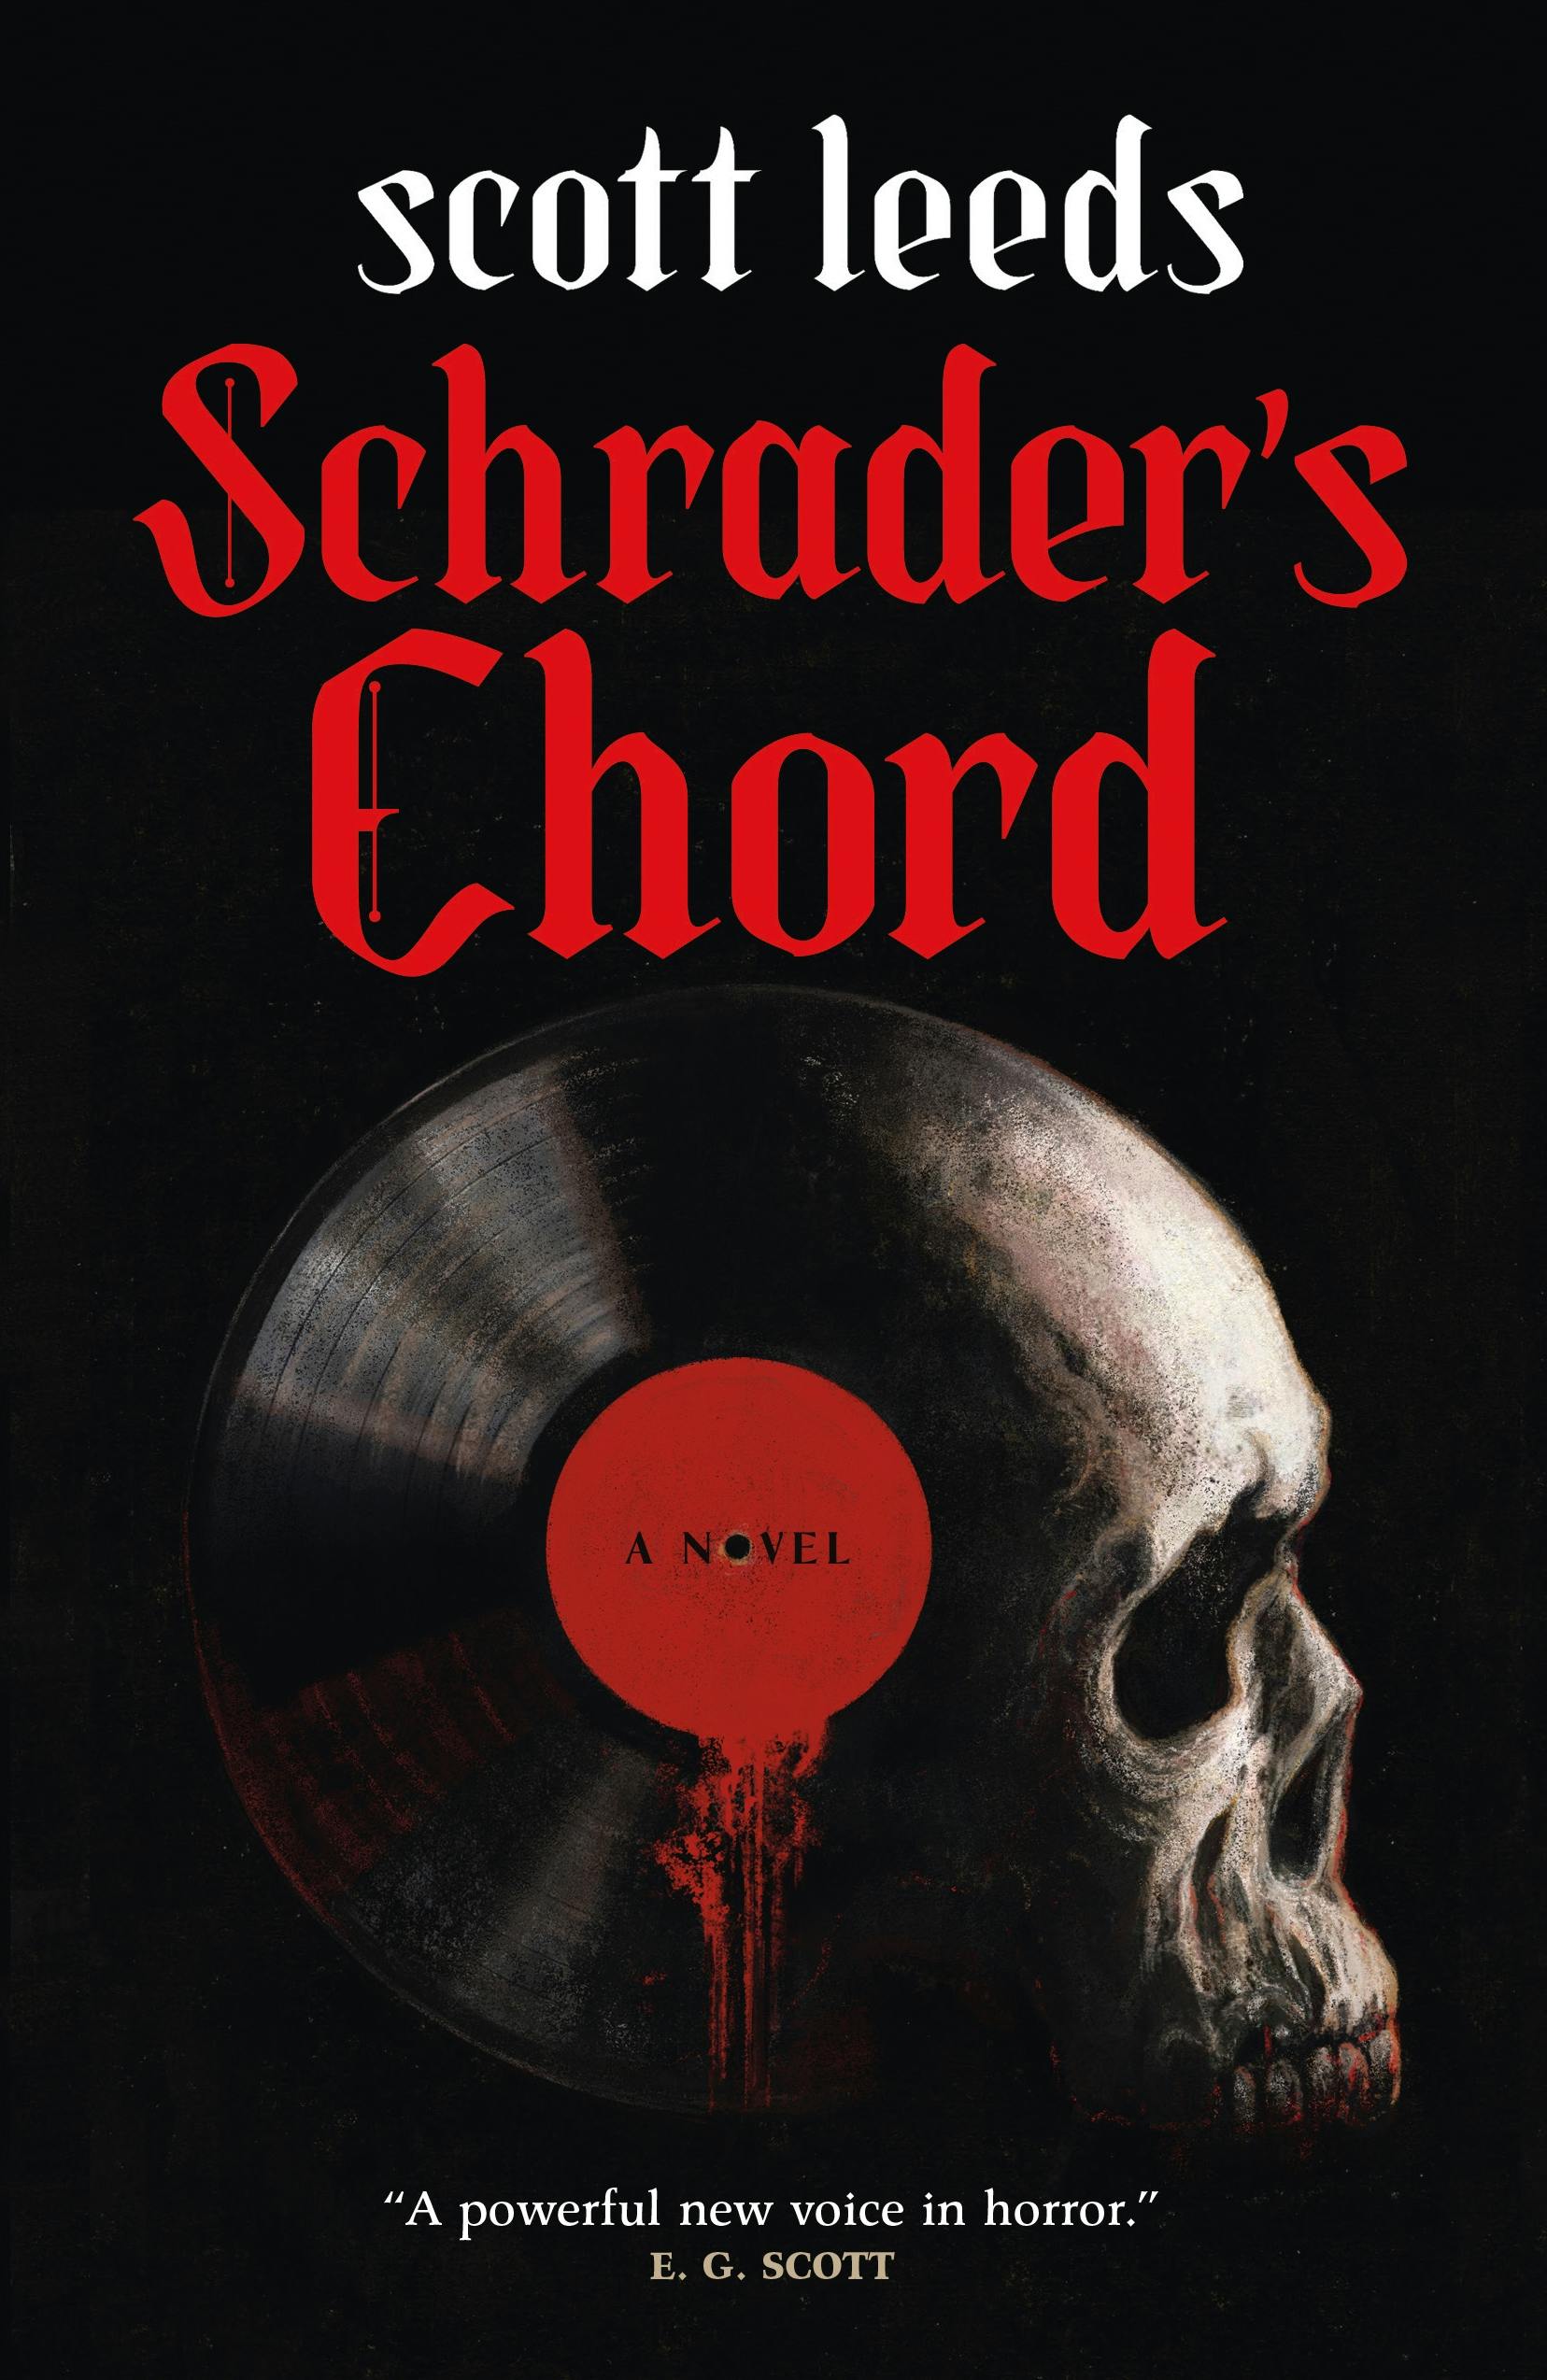 Cover for the book titled as: Schrader's Chord